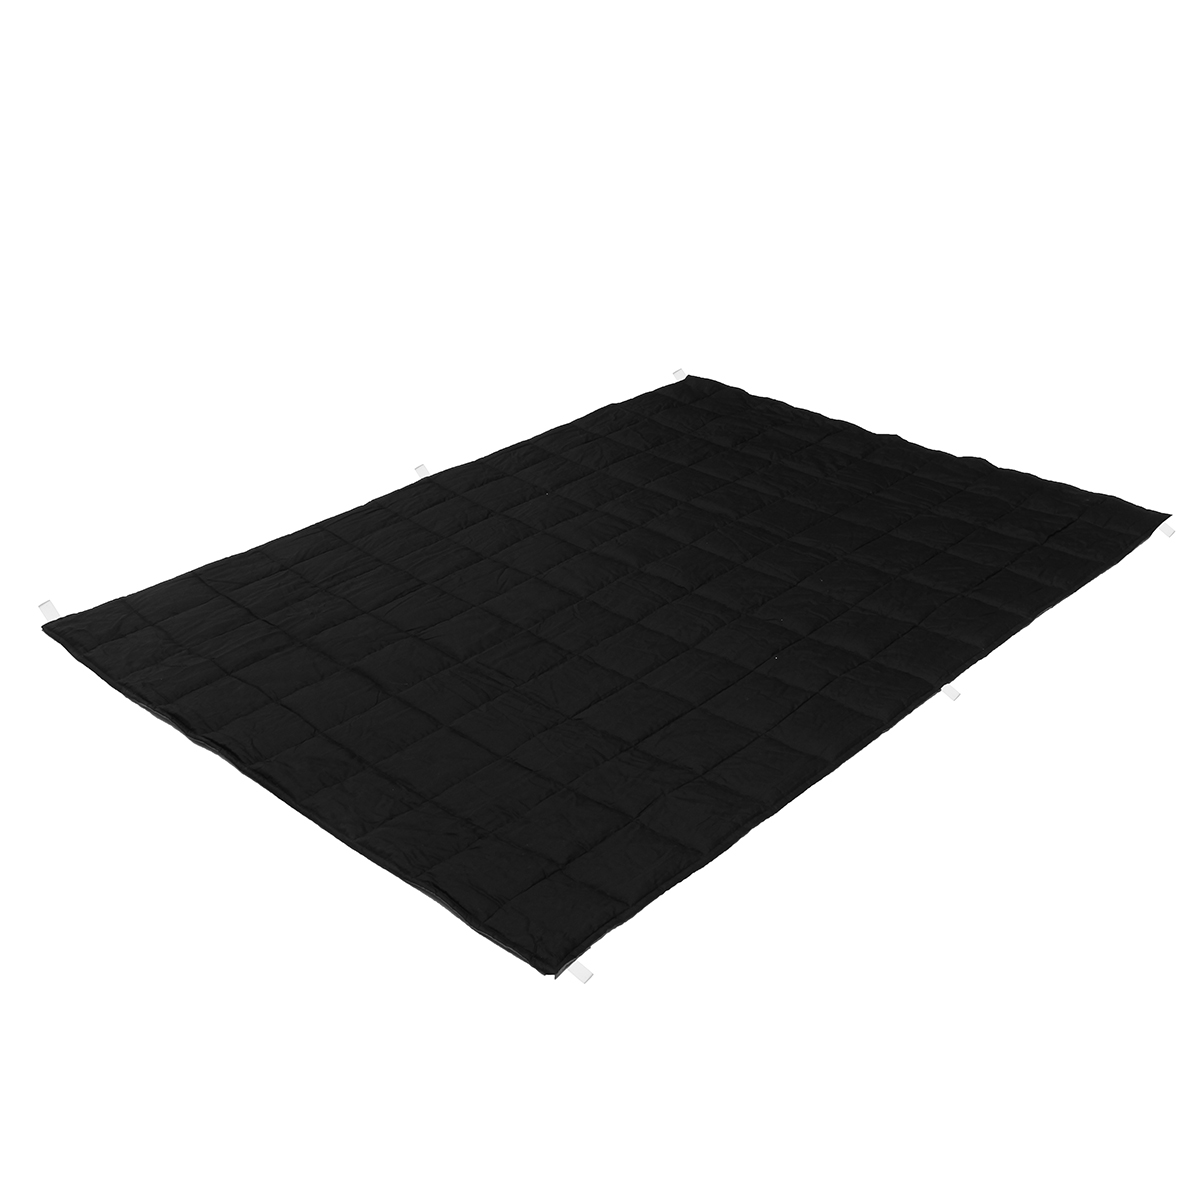 100x150CM-Weighted-Cotton-Blanket-Heavy-Sensory-Relax-45--7--95Kg-Black-Blankets-1349469-6